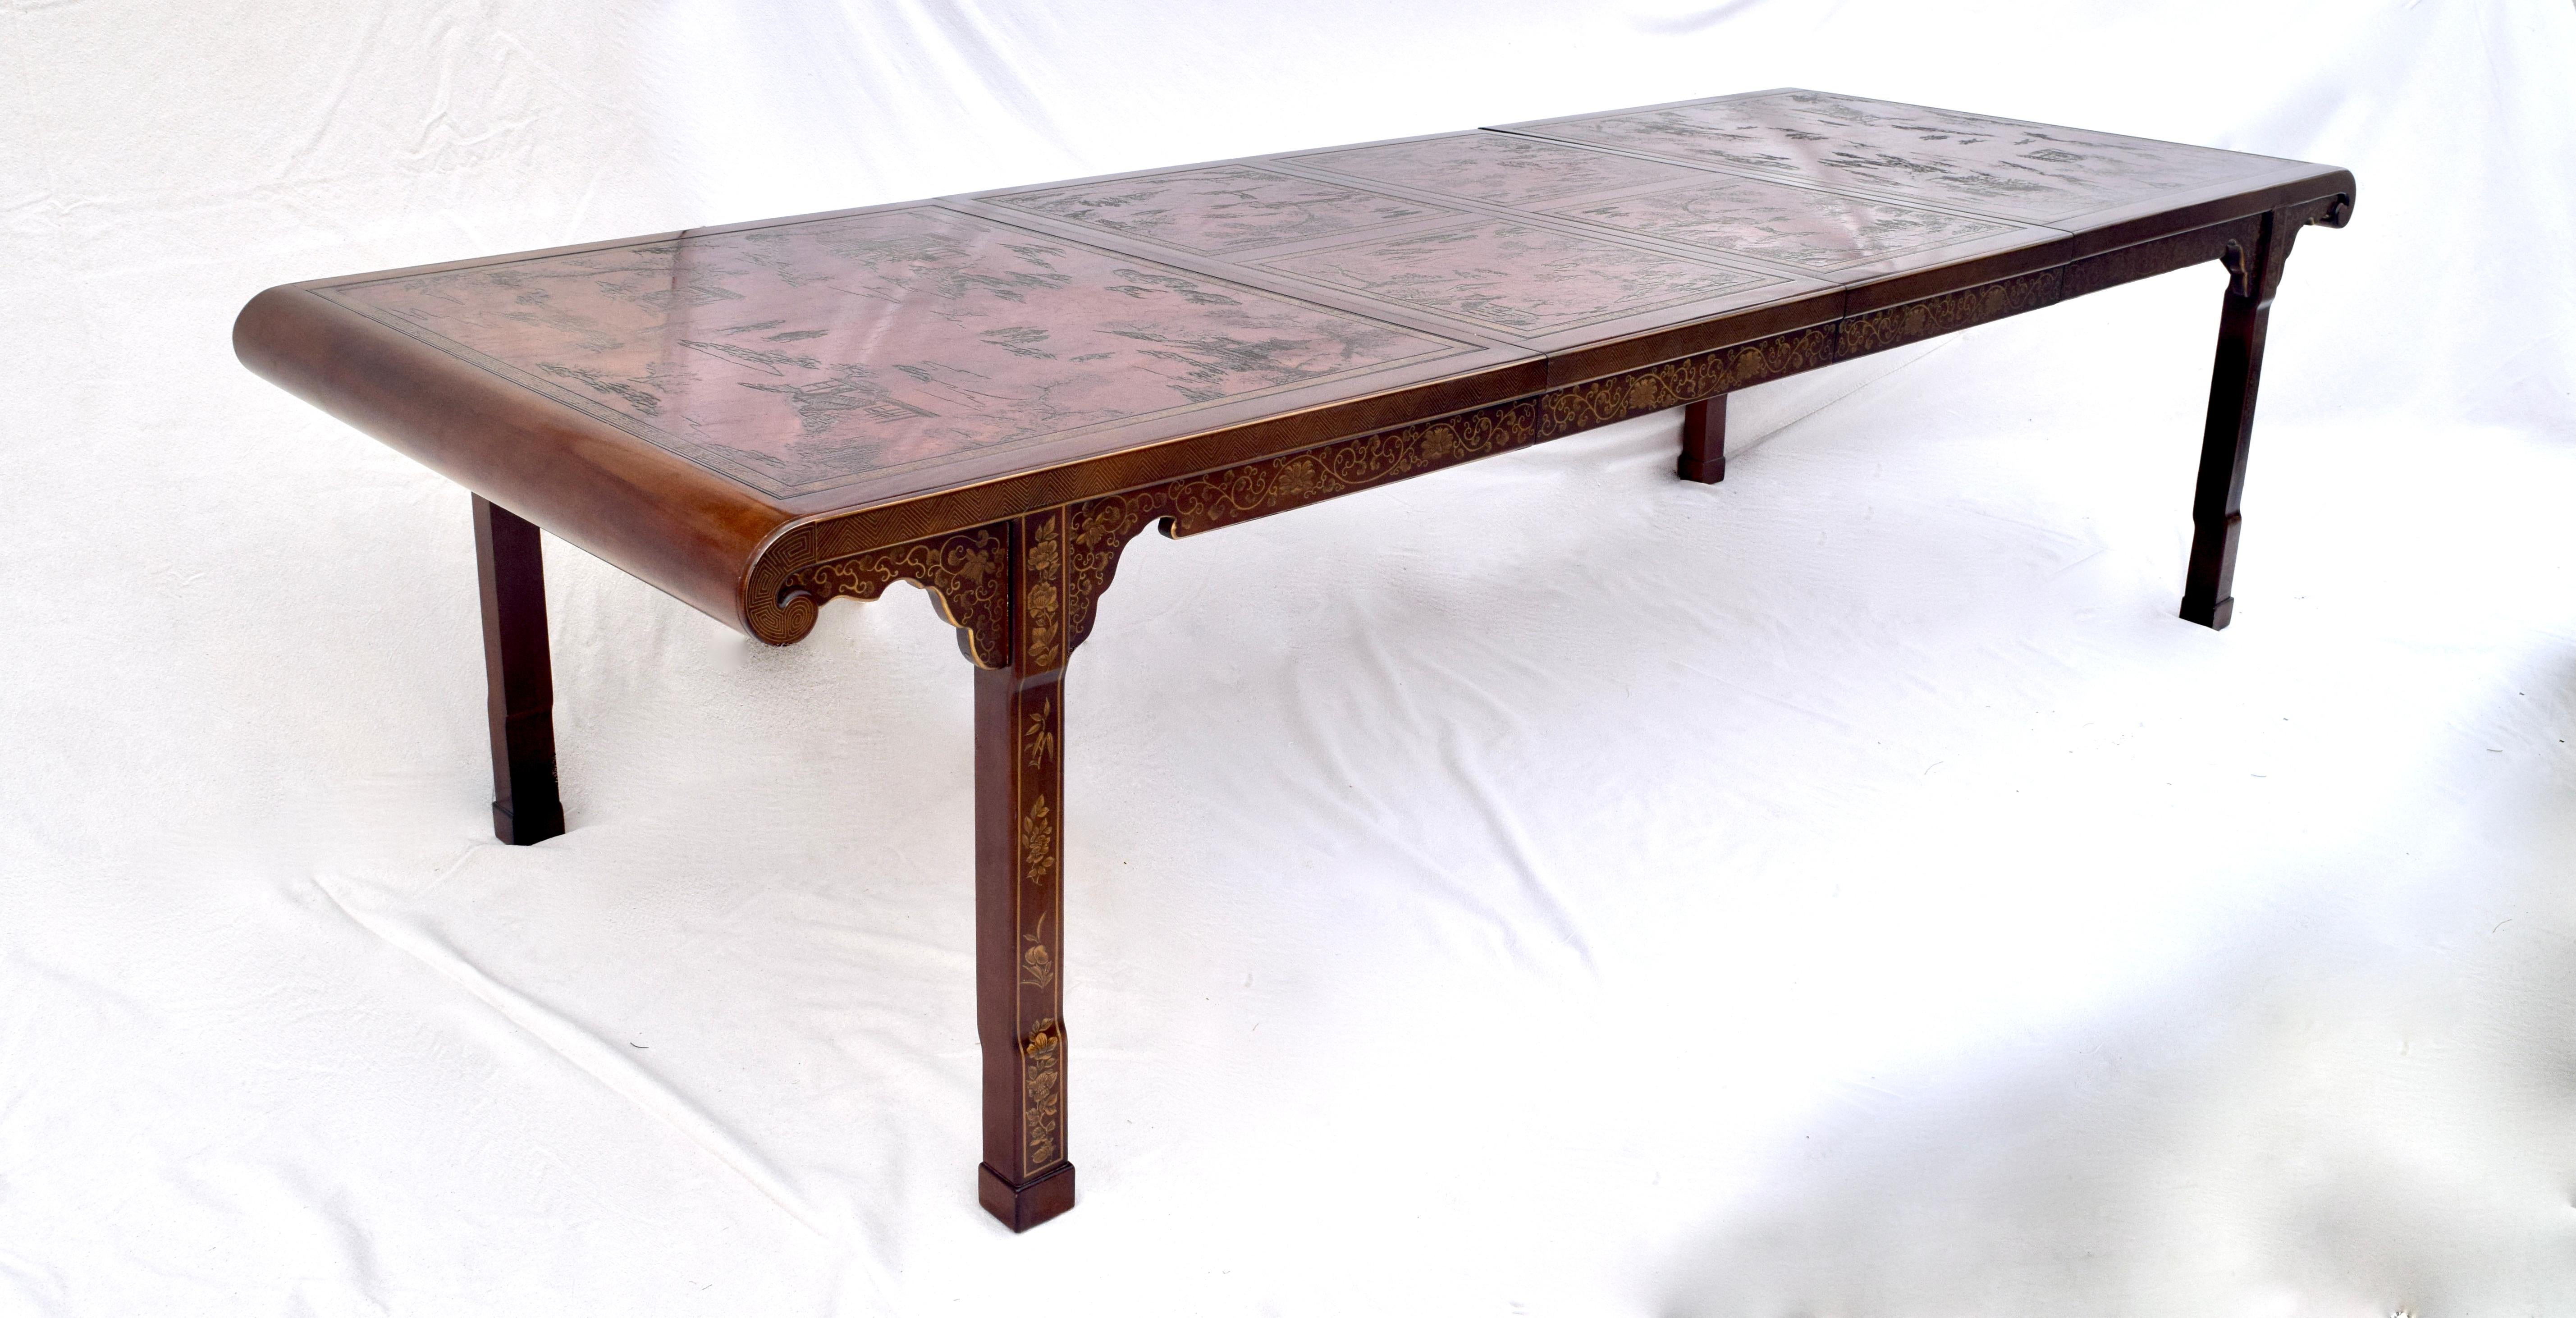 An exquisite Mid-Century Modern Hollywood Regency Chinoiserie extension dining table by Drexel Heritage 